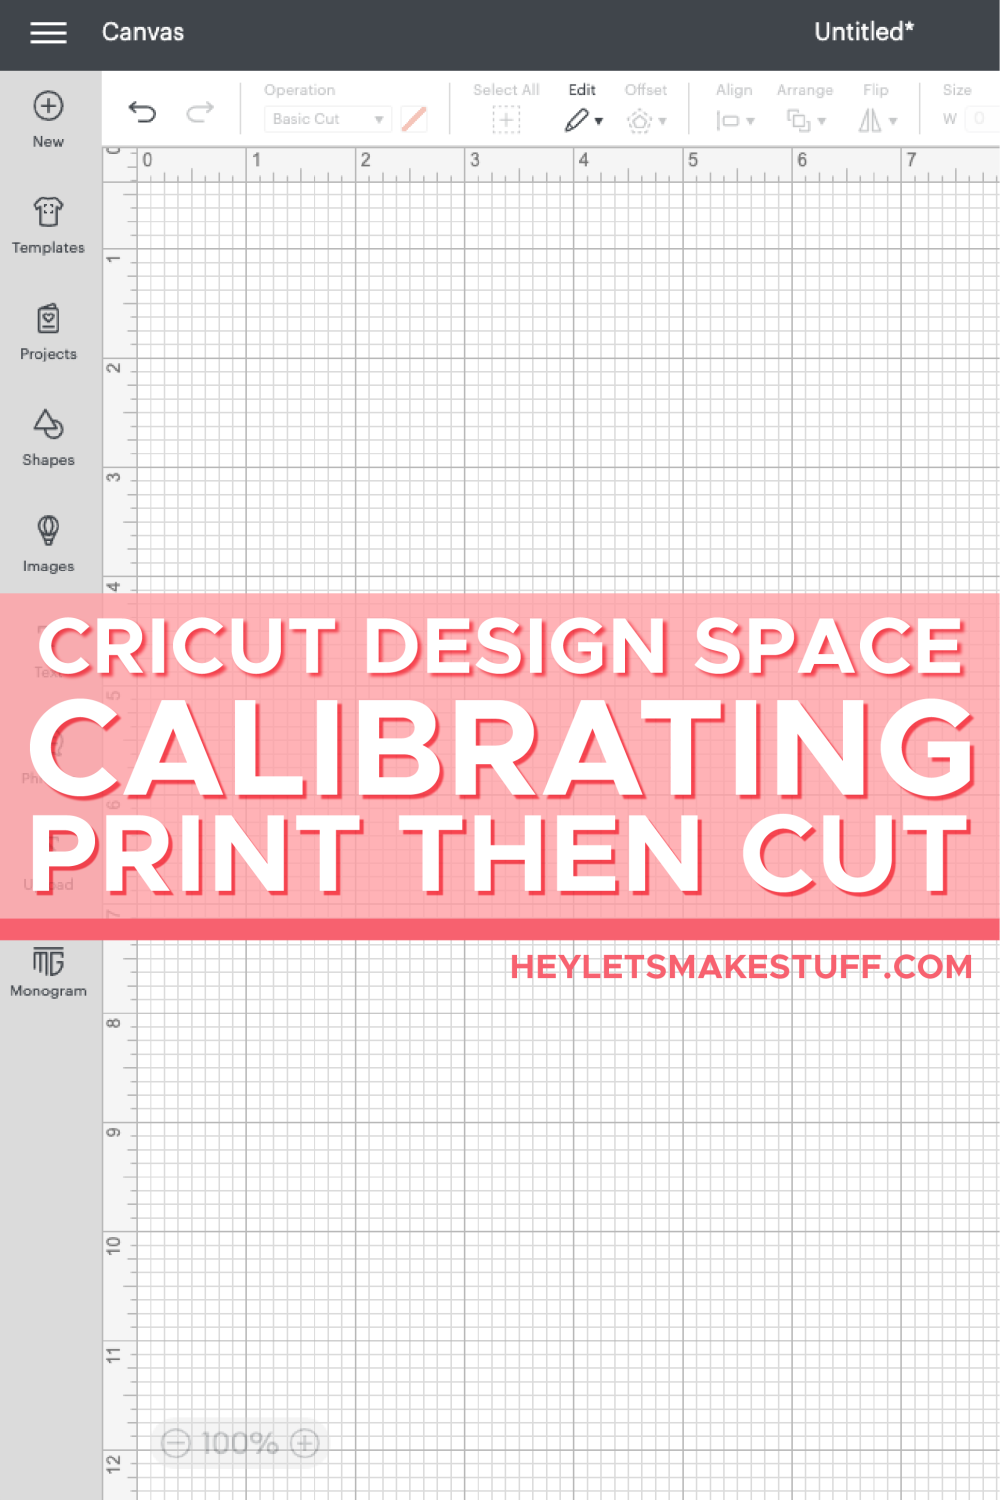 Cricut mat with Canvas Image with overlay that says "Cricut Design Space Print then Cut Calibration"